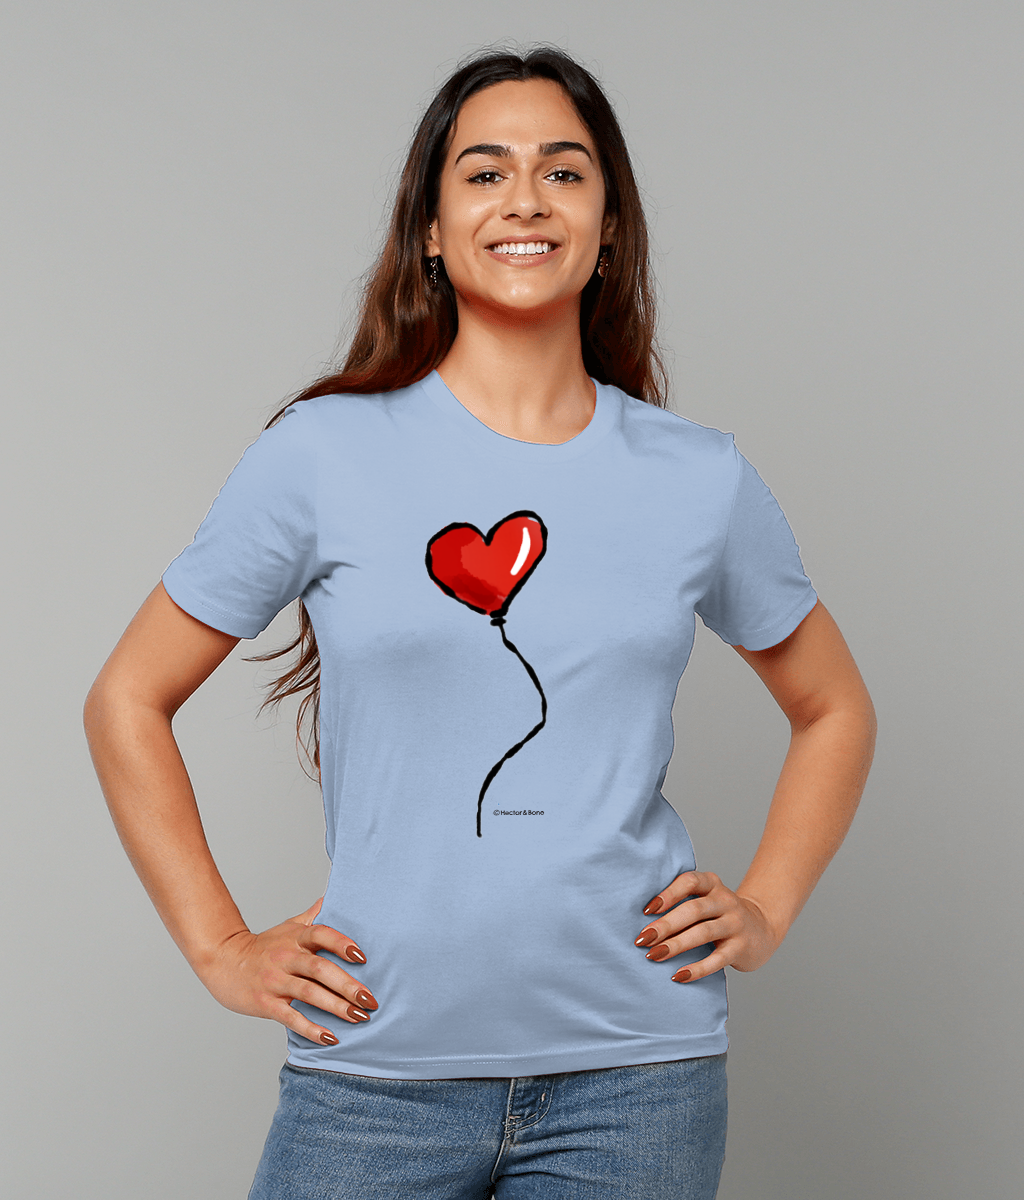 Woman wearing a Red Heart Balloon I Love you T-shirt design printed on a light blue vegan cotton t-shirt by Hector and Bone